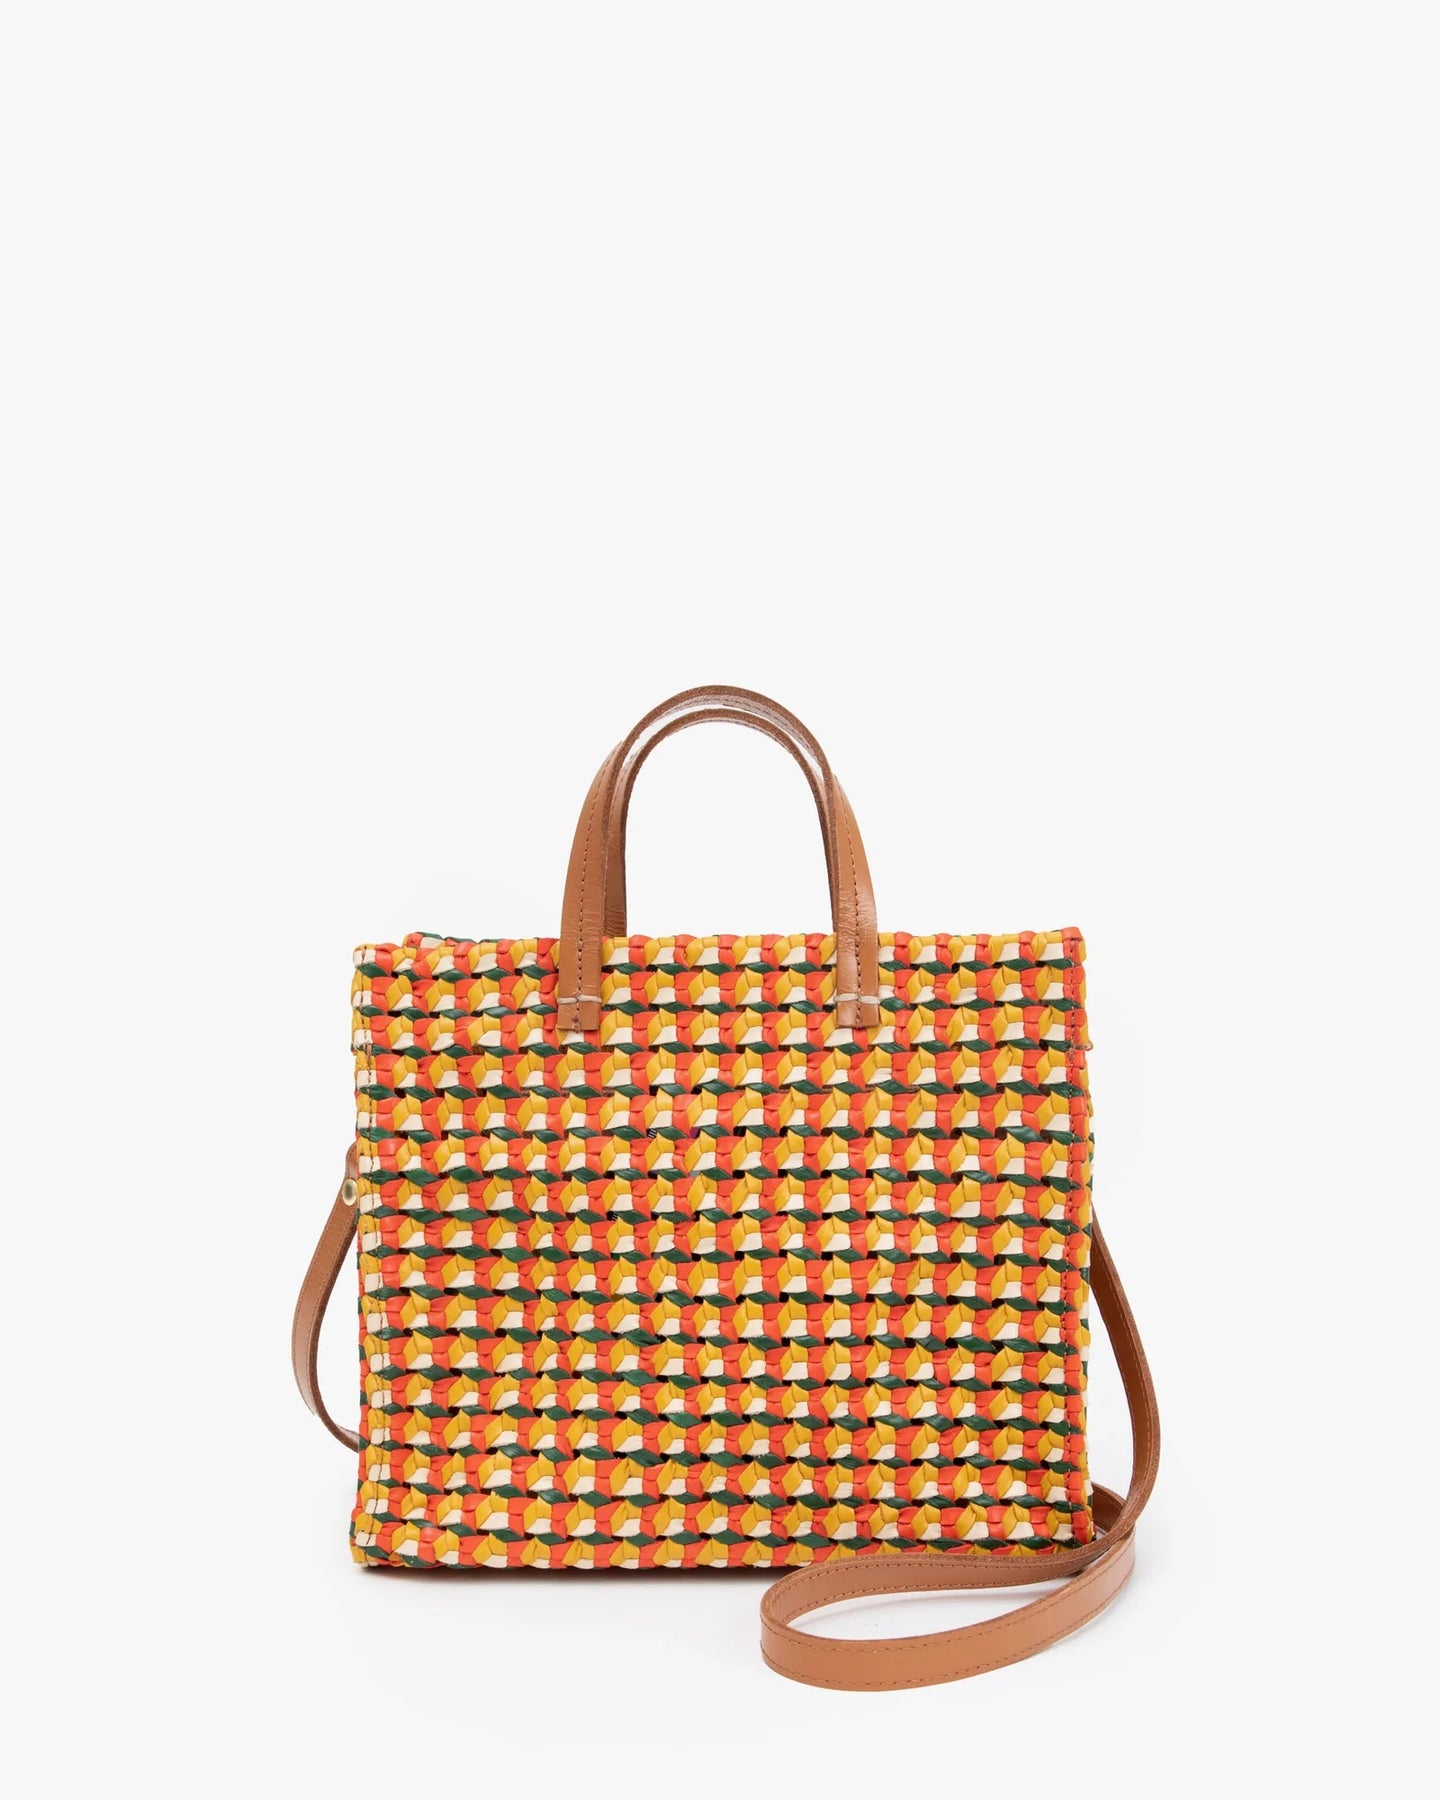 Clare V. Rattan Petit Simple Tote in Cream - Bliss Boutiques